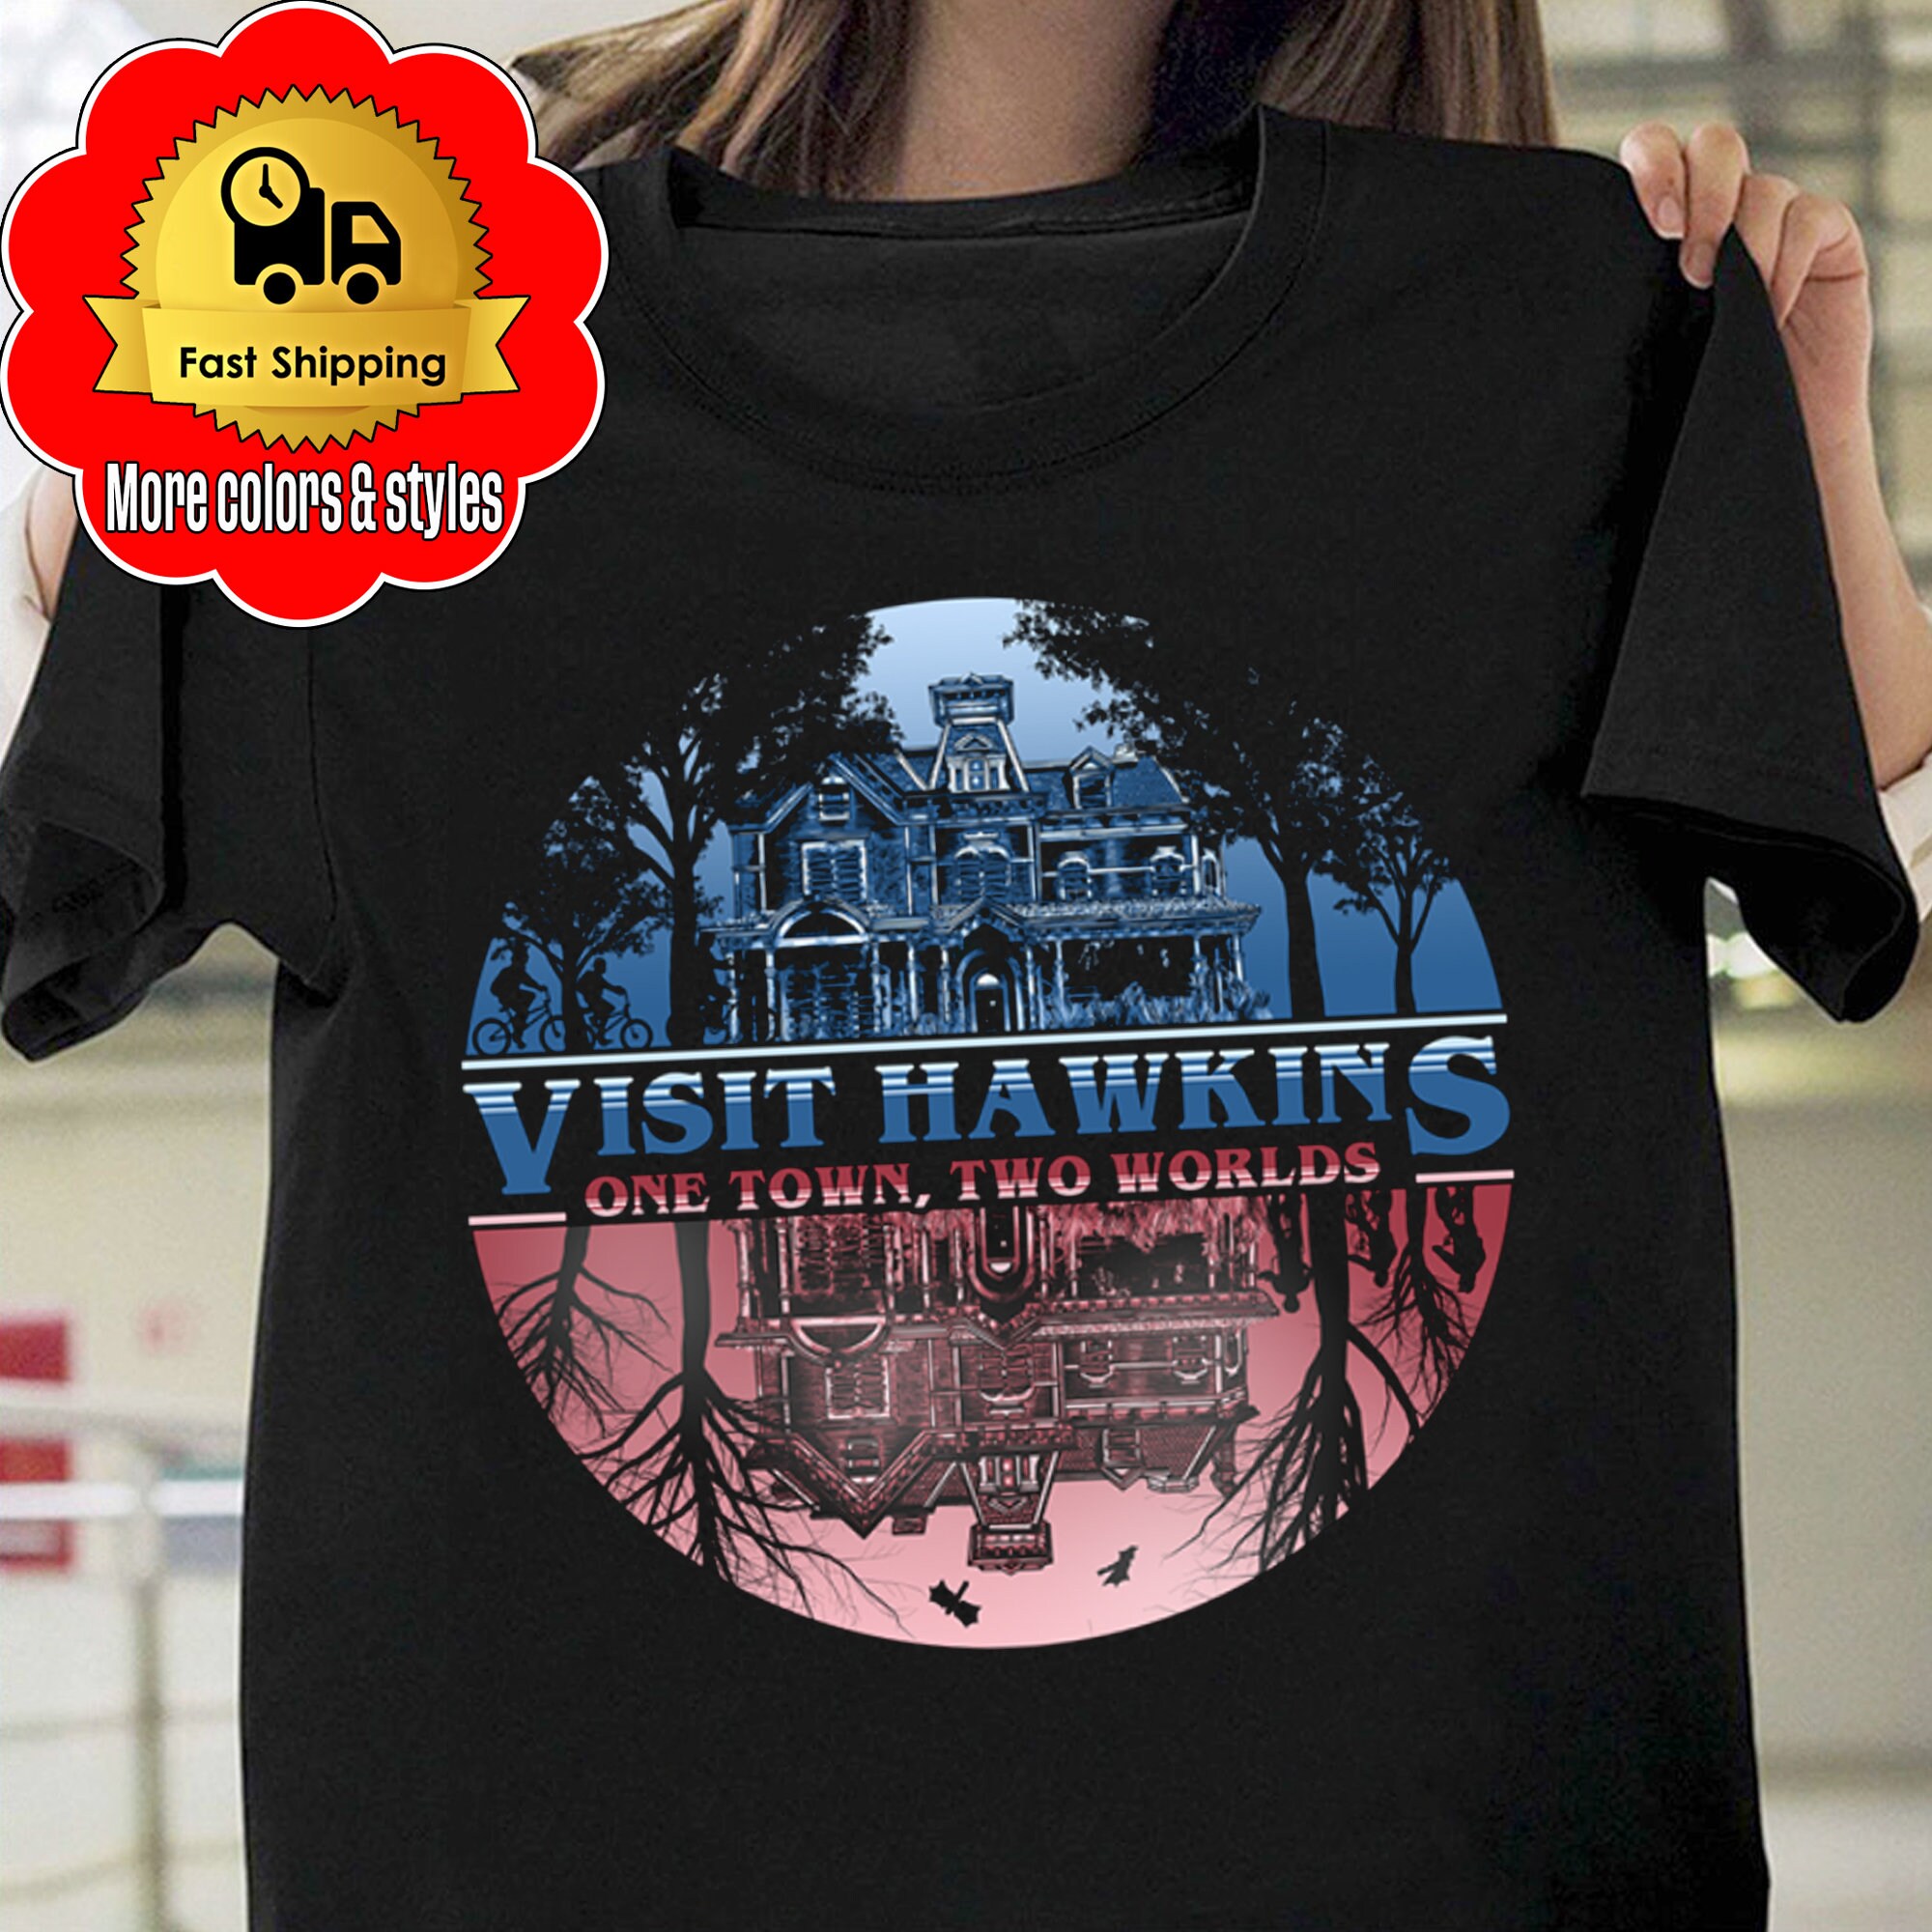 Visit Hawkins One Town Two Worlds Shirt